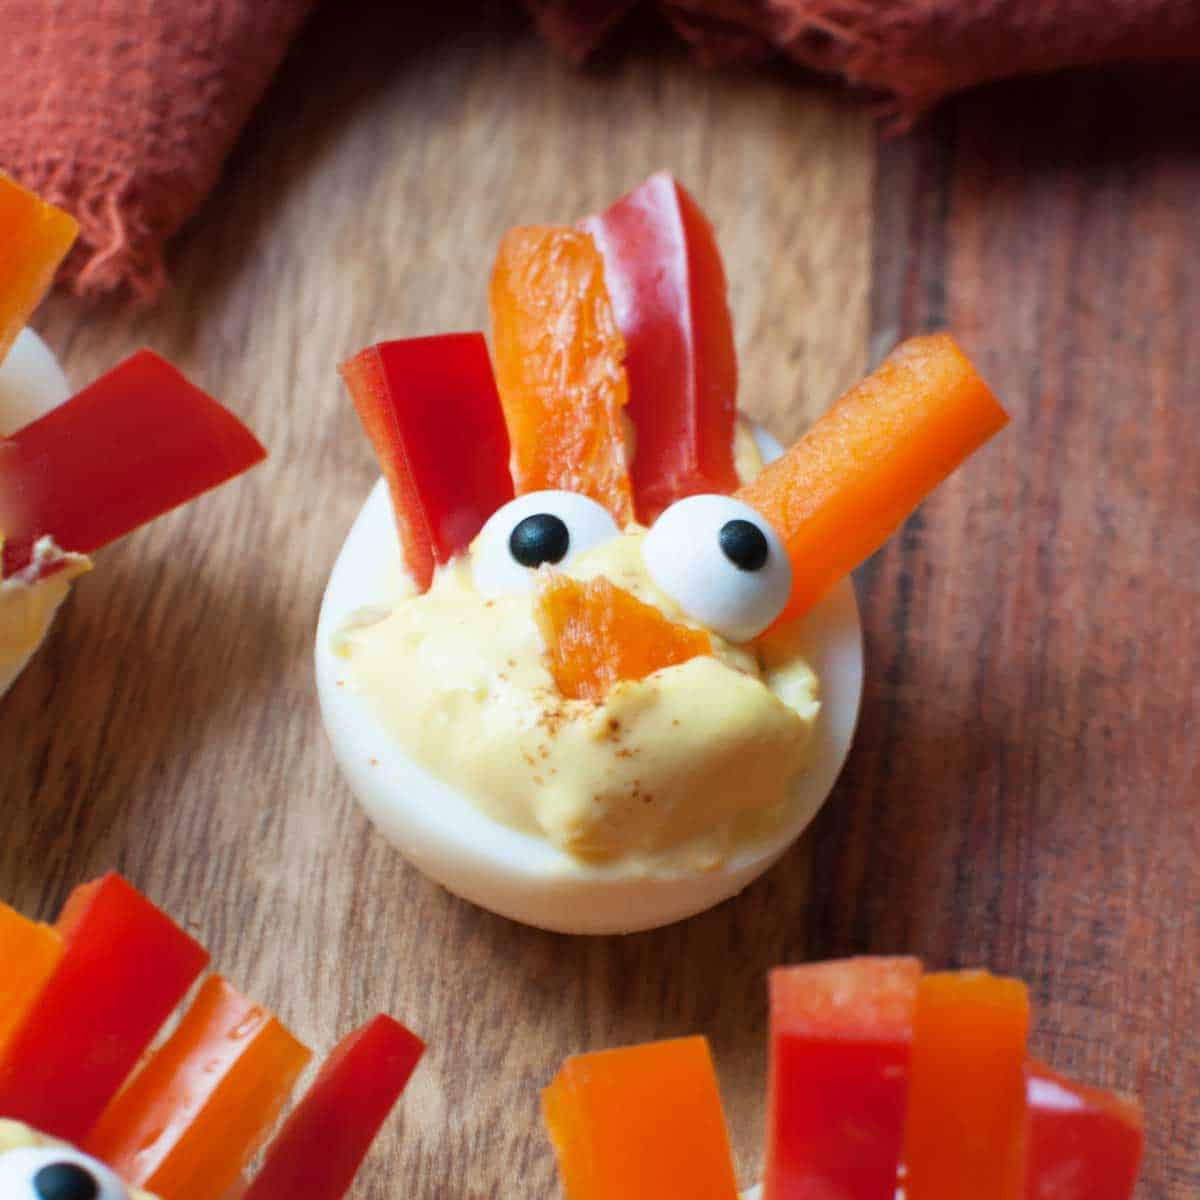 a close up view of a deviled egg that has candy eyes and bell pepper strips arranged to look like a turkey